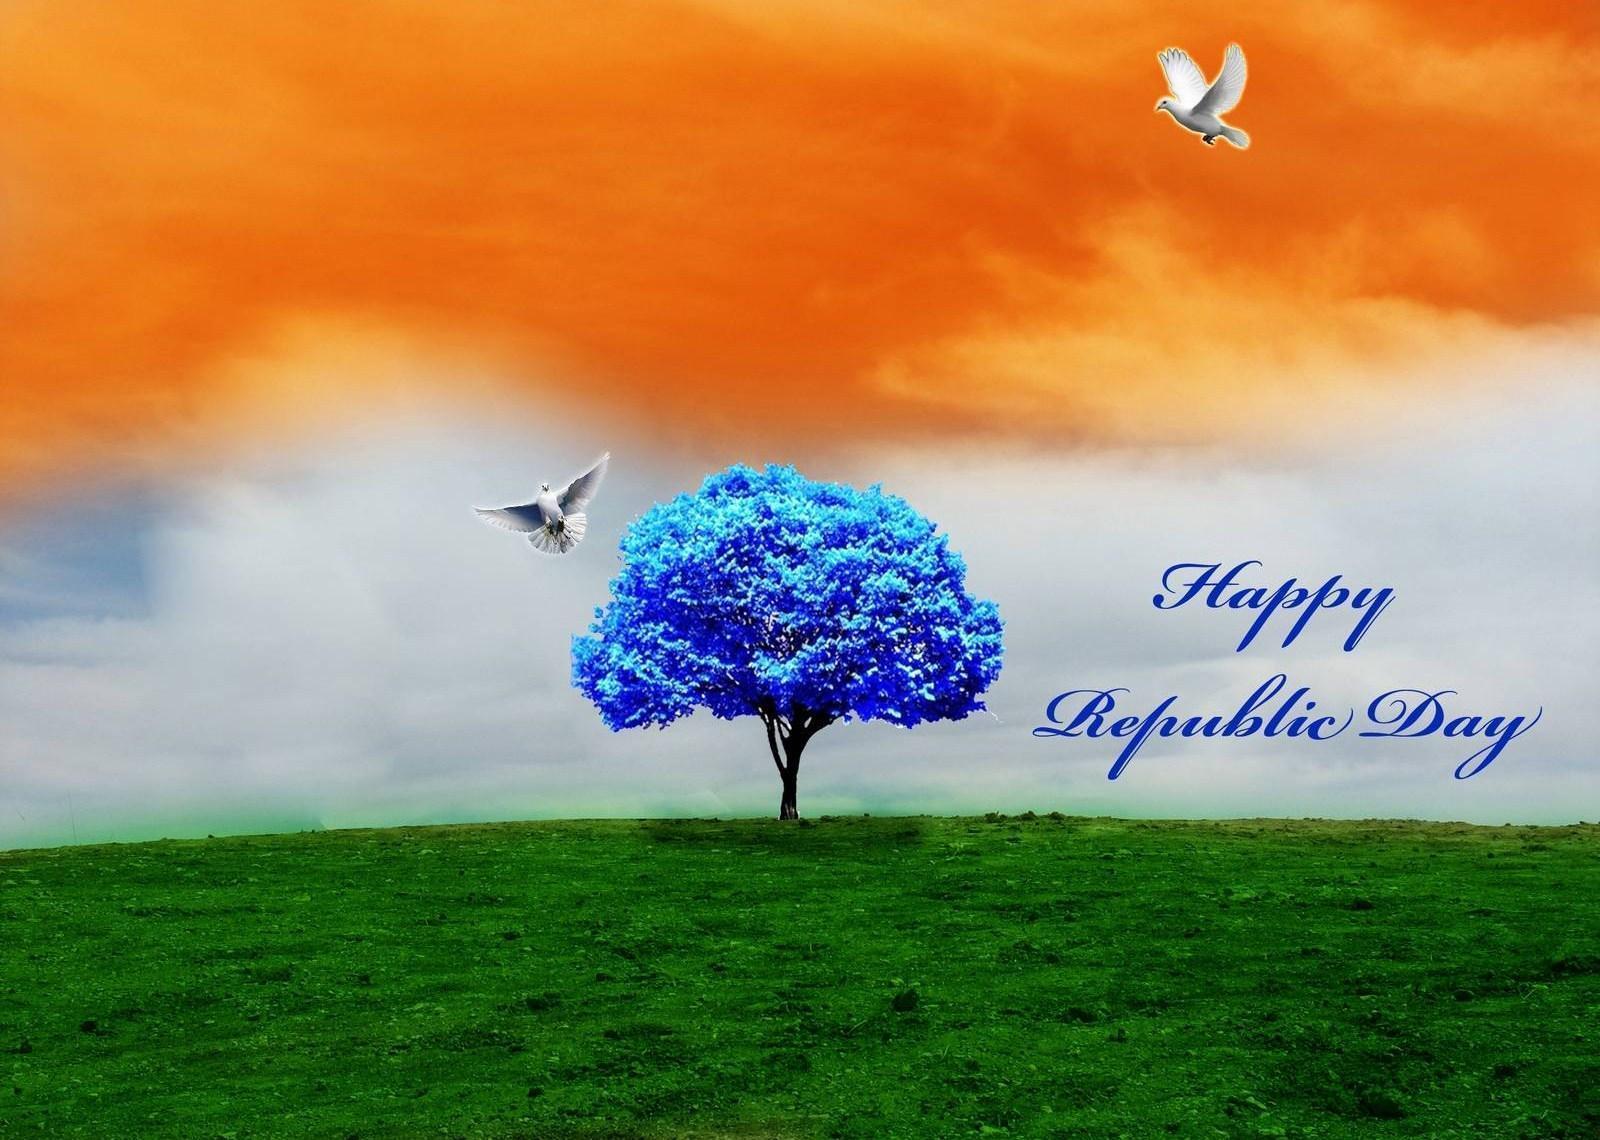 Republic day 2018 Indian Flag Image, Picture, Wallpaper